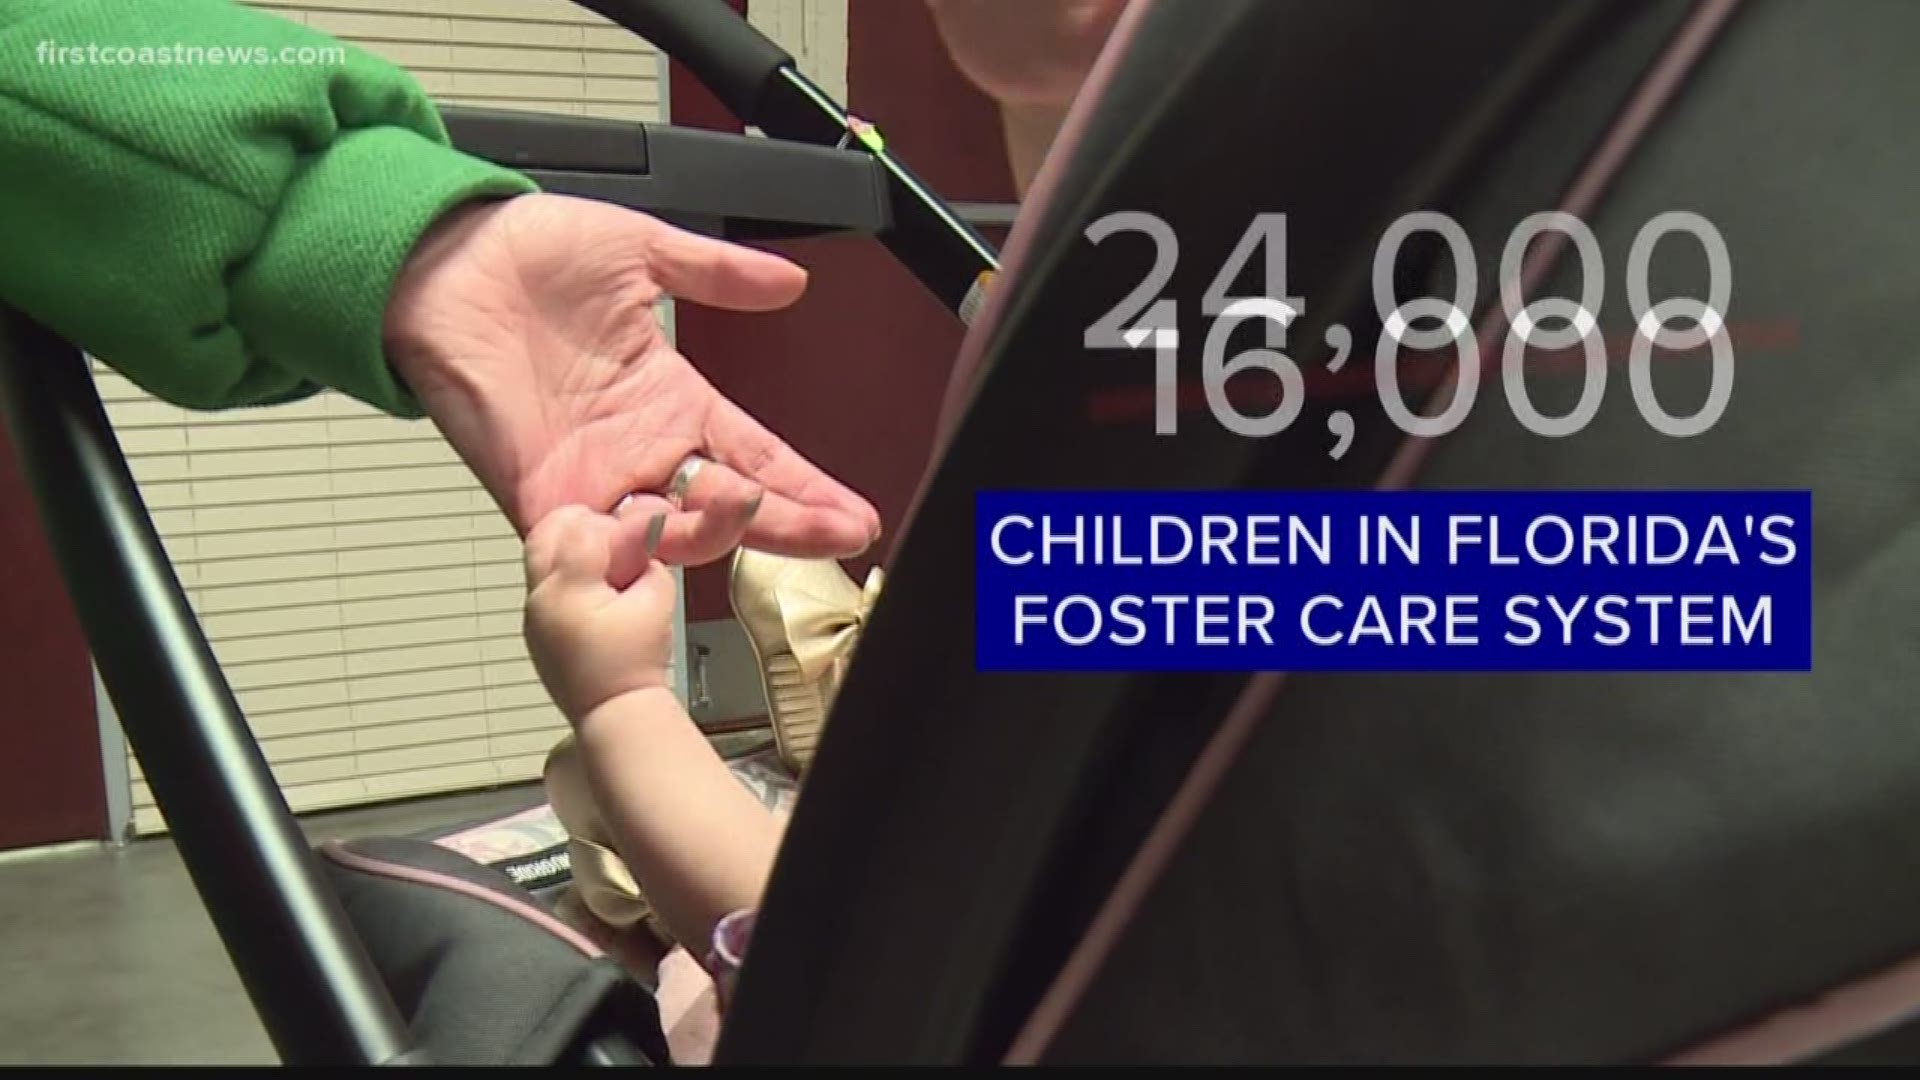 The non-profit One More Child is partnering with Impact Church in hopes of licensing 60 new homes this year where foster children can find refuge.